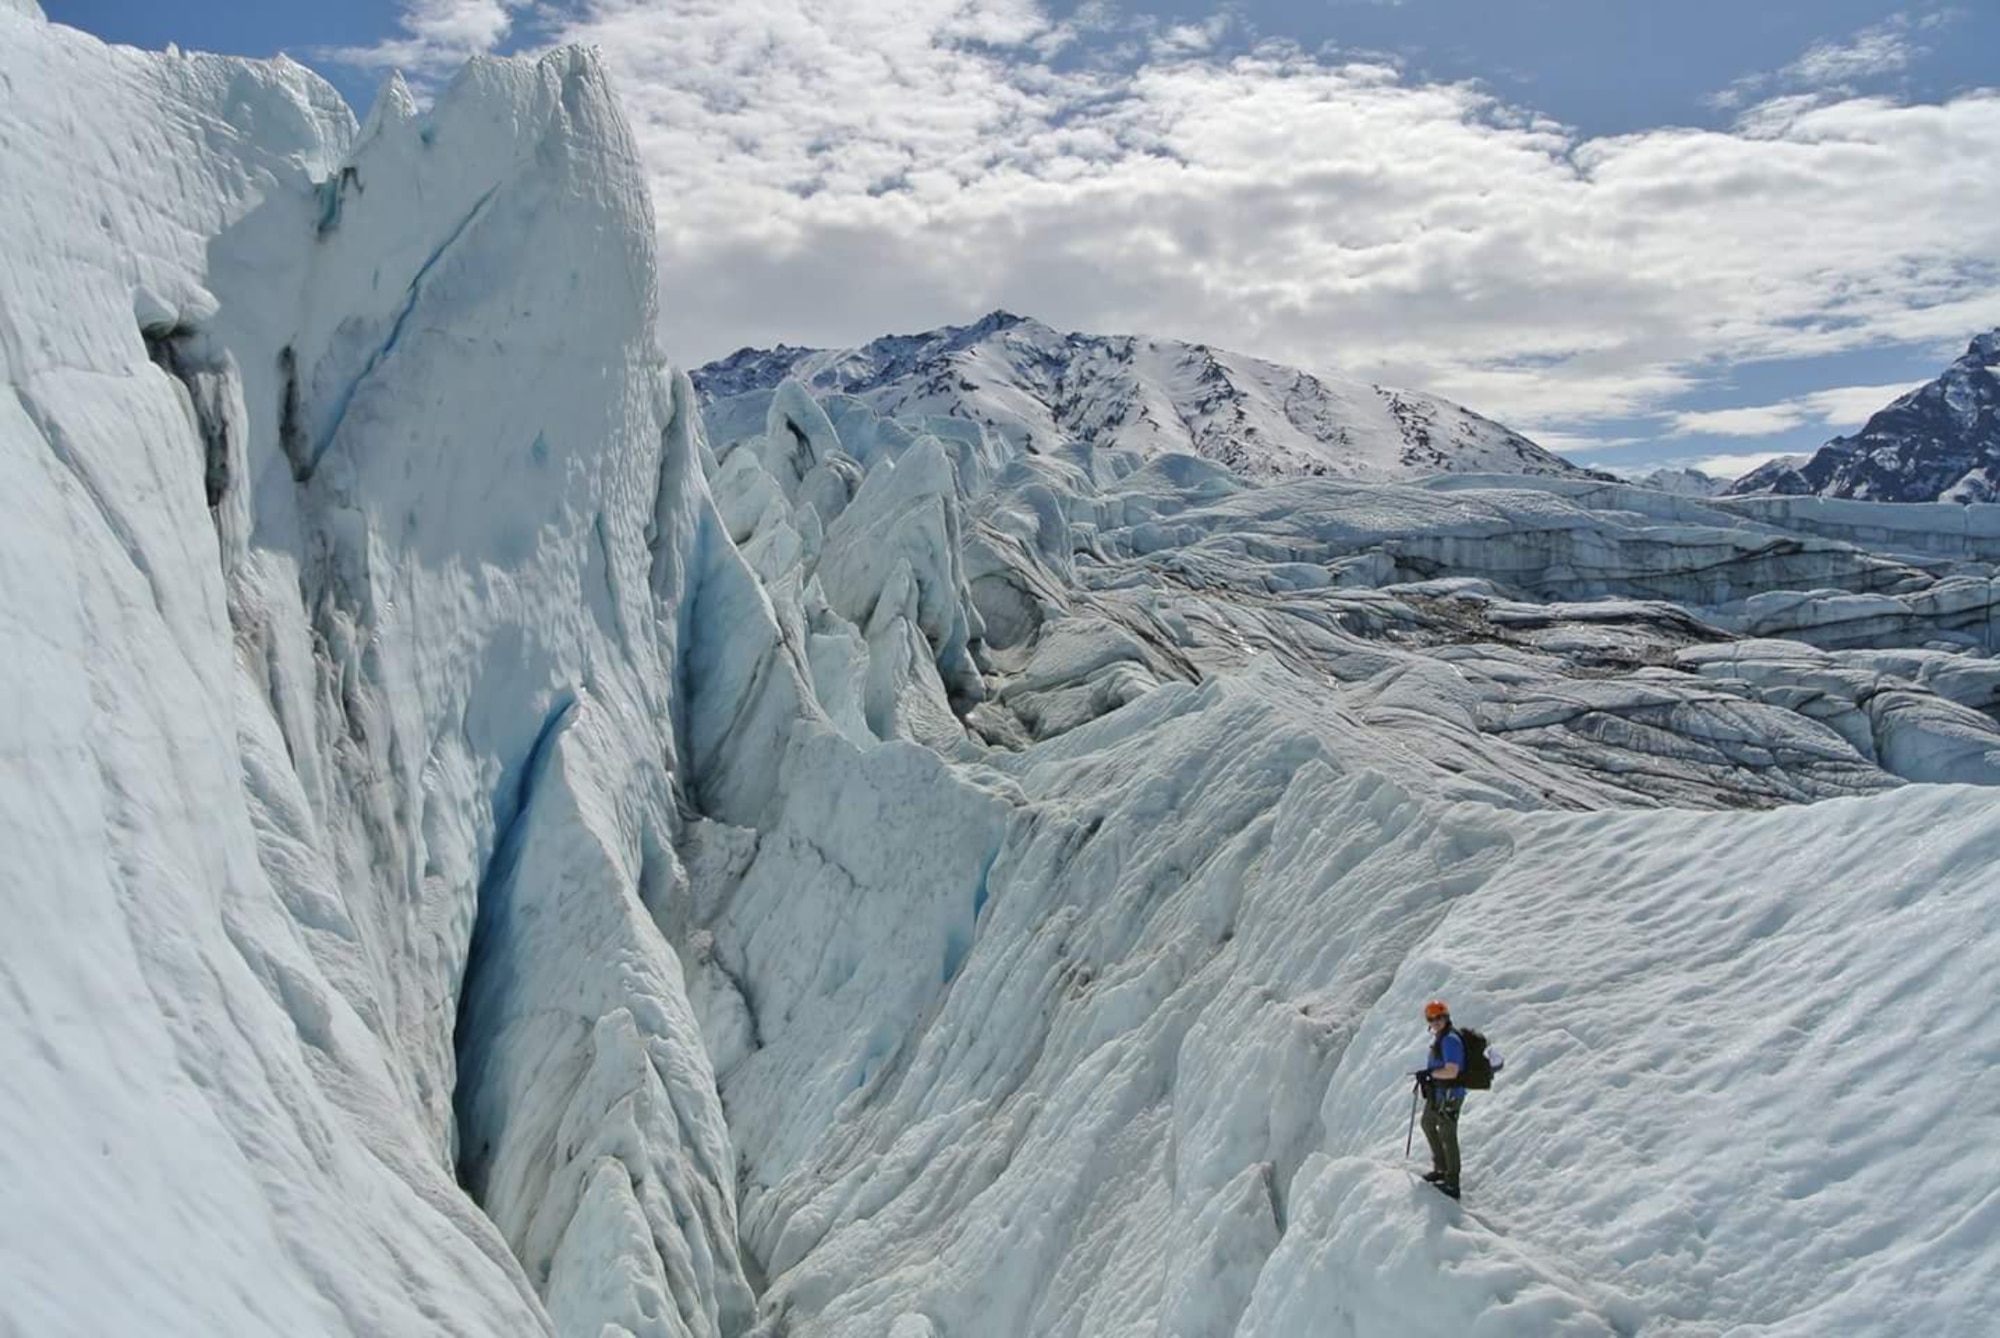 A glacier ice climb is one of the trips offered by the Outdoor Adventure Program as part of the Women in the Wilderness program. The program is beginner oriented and can help make women more comfortable in the wilderness. (Courtesy photo)